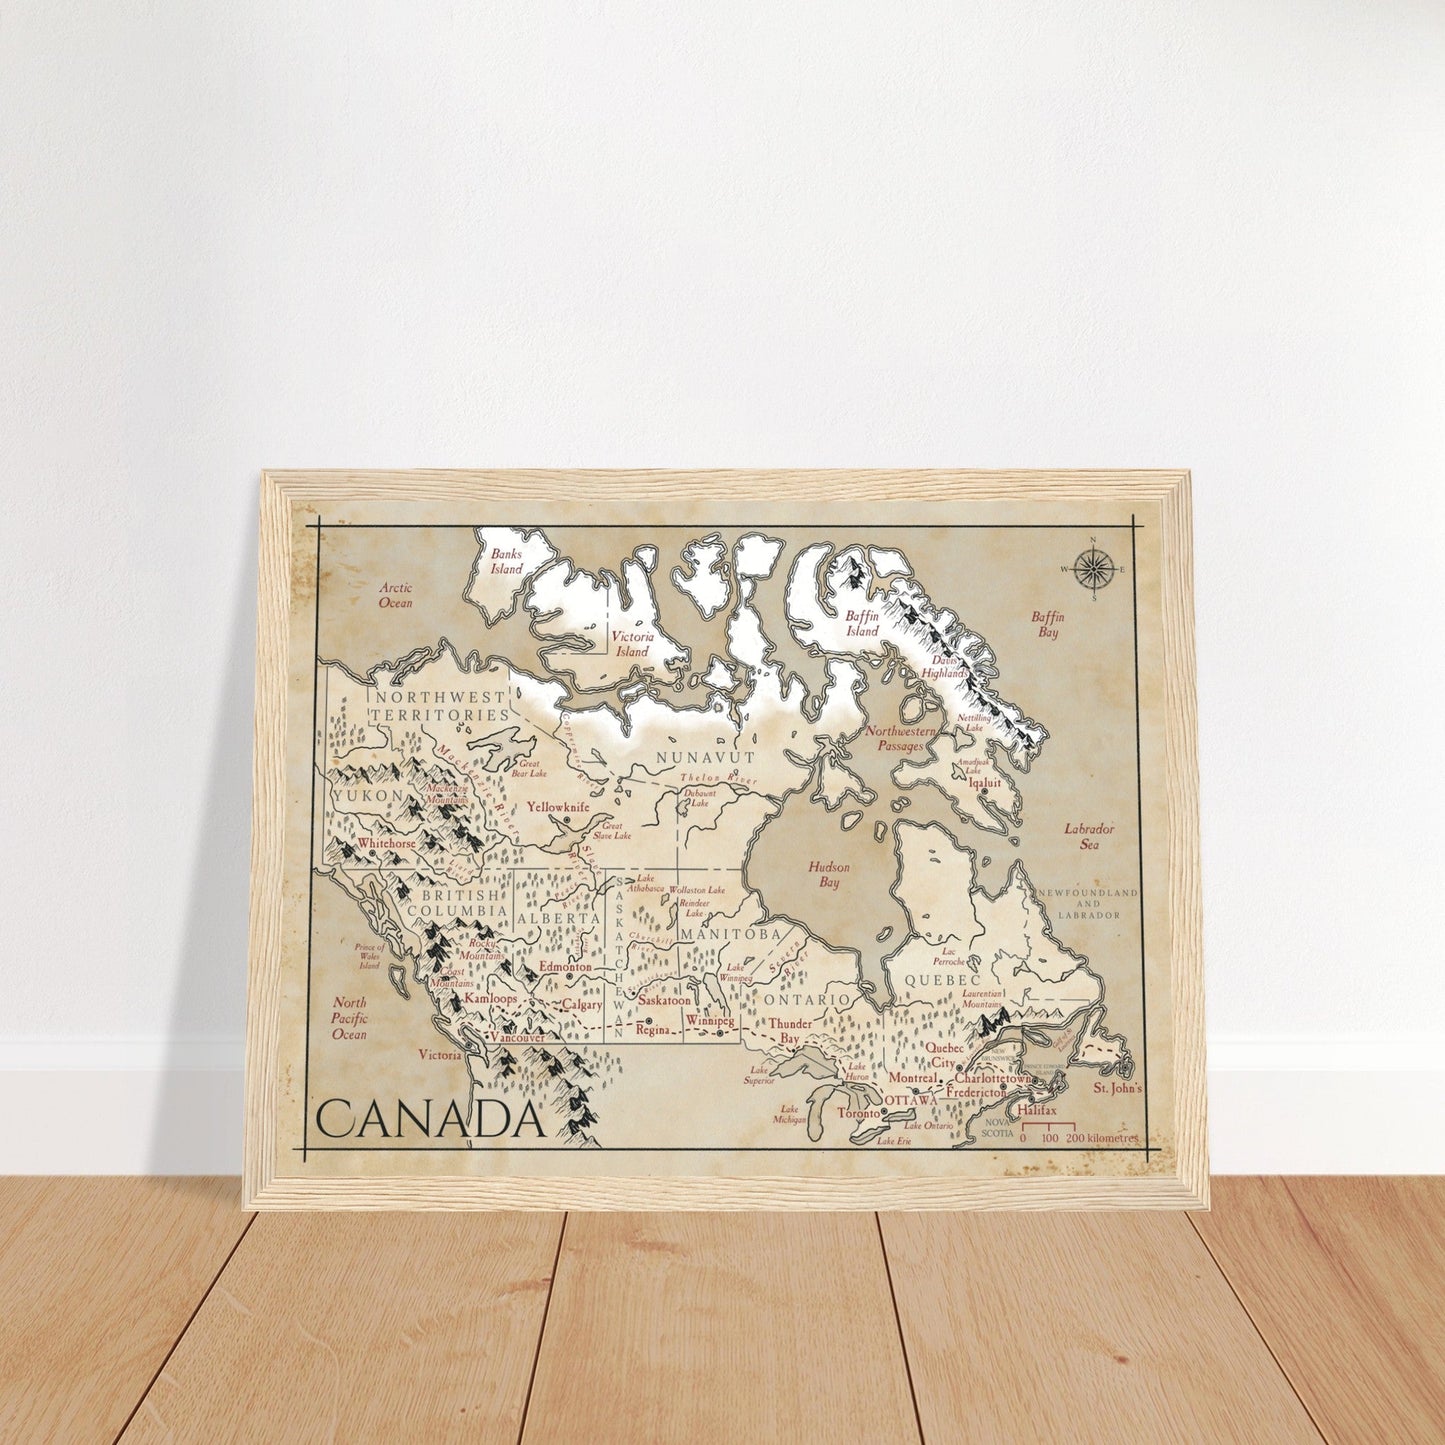 Map of Canada - Fantasy-inspired - Print - Fabled Maps